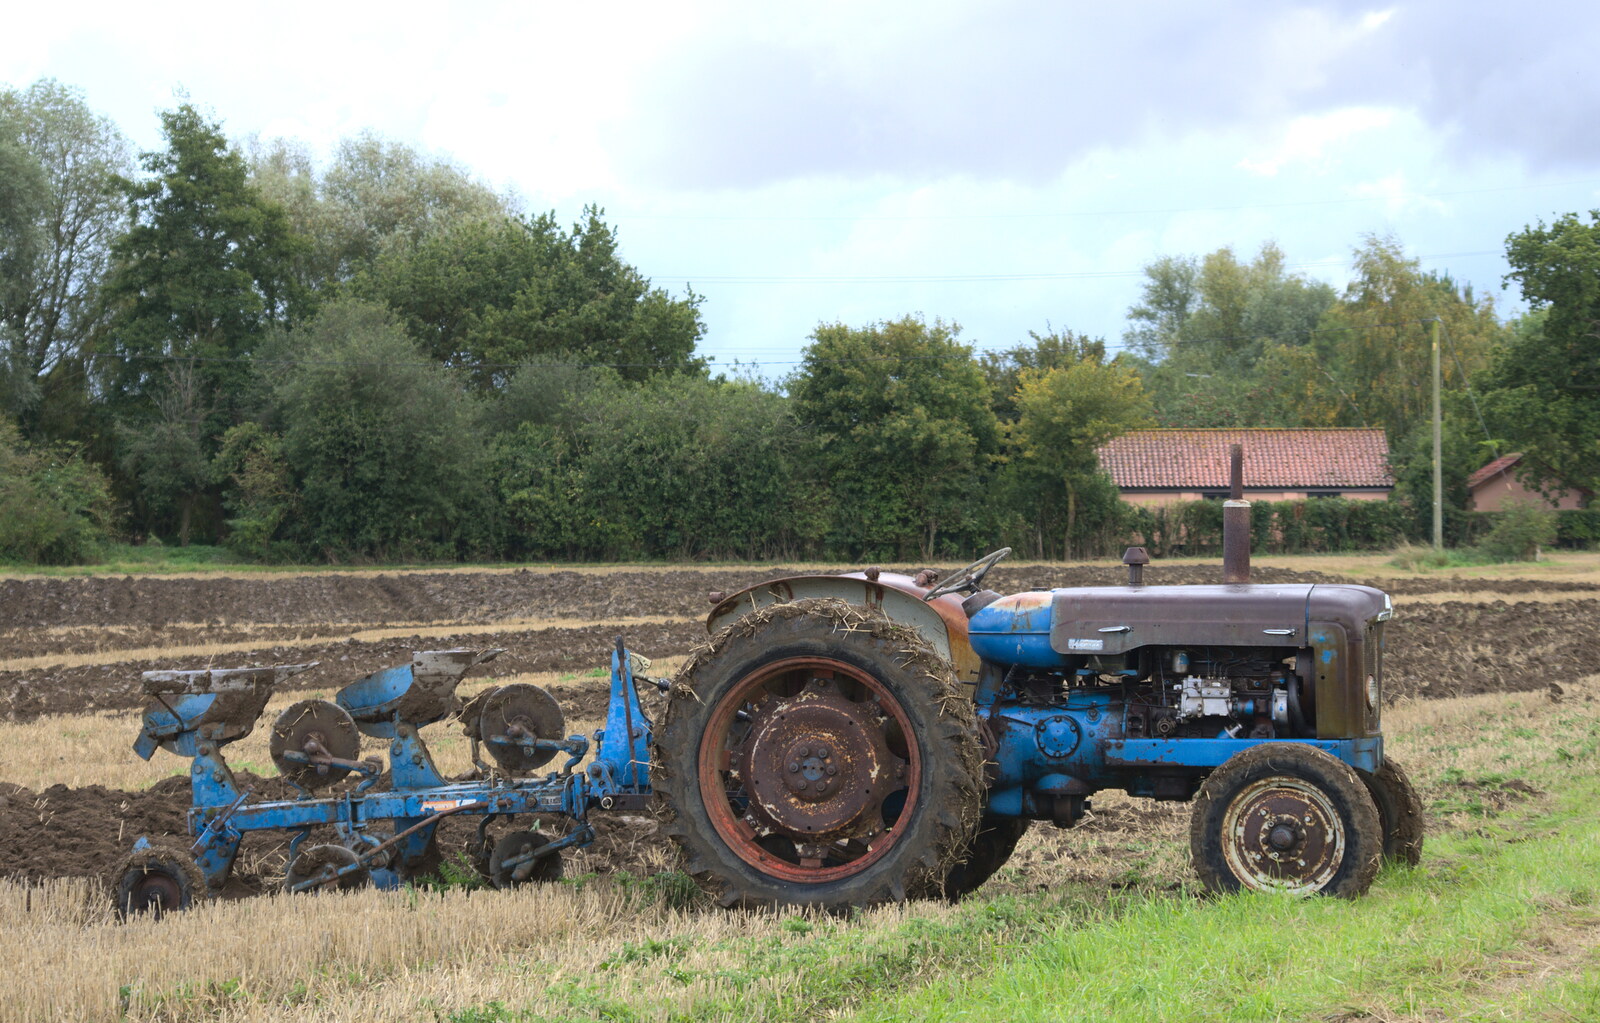 Another muddy tractor from Ploughing and Pizza, Thrandeston and Bury St. Edmunds, Suffolk - 17th September 2017